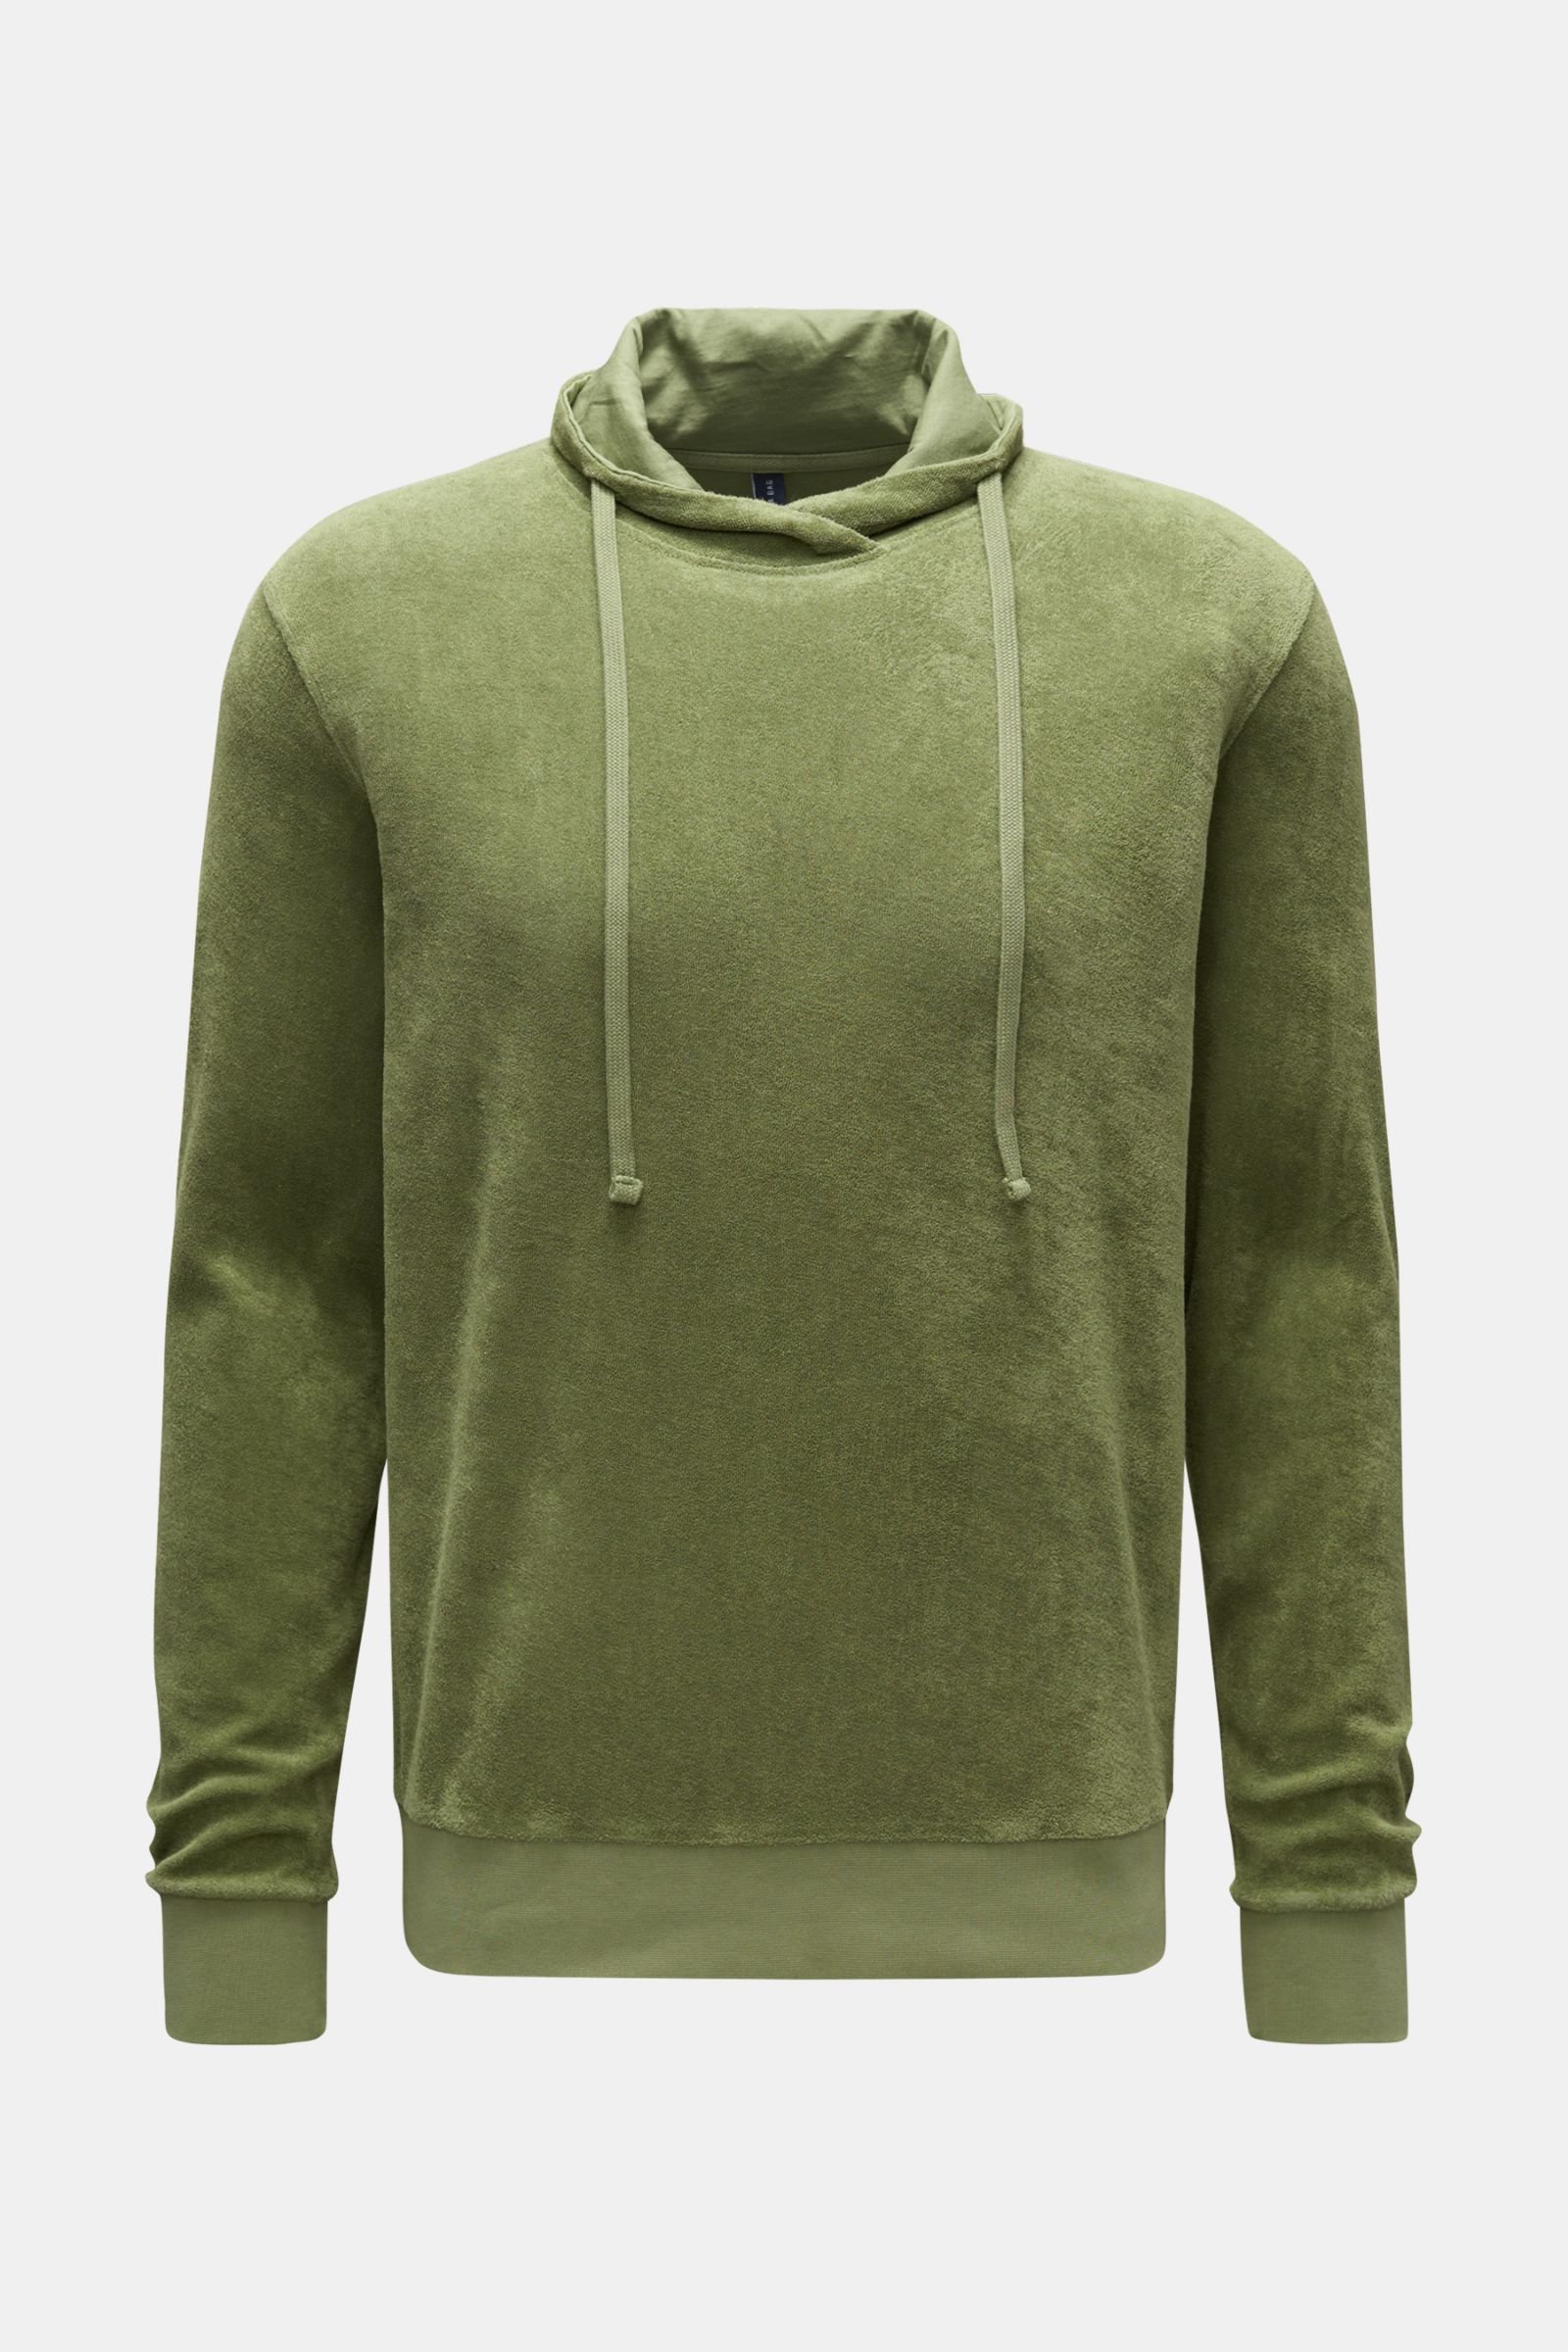 Terry jumper 'Terry Turtle' grey-green